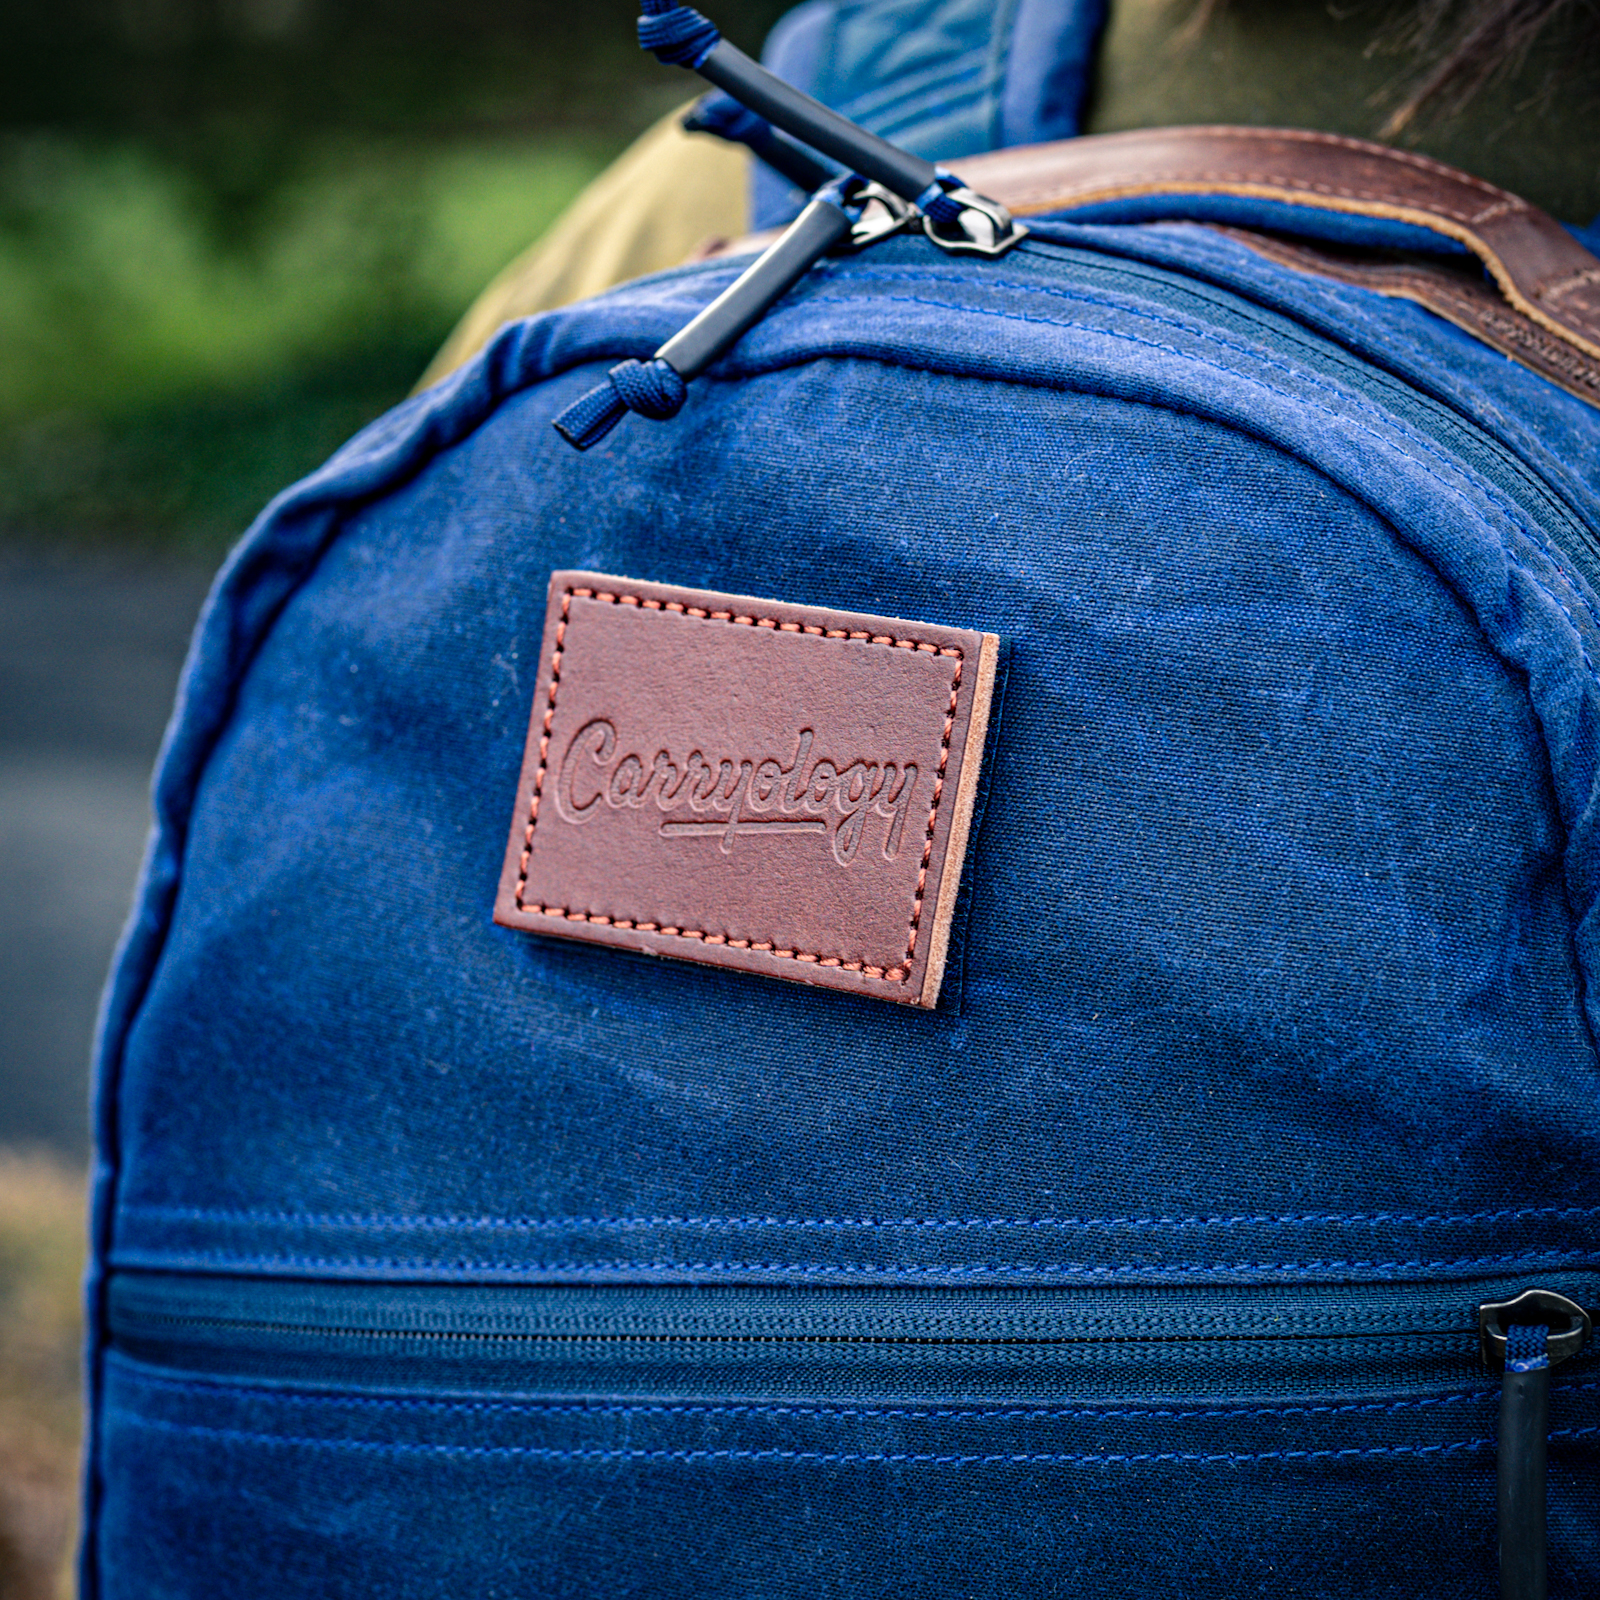 Carryology Heritage P21 Patch - Lifestyle